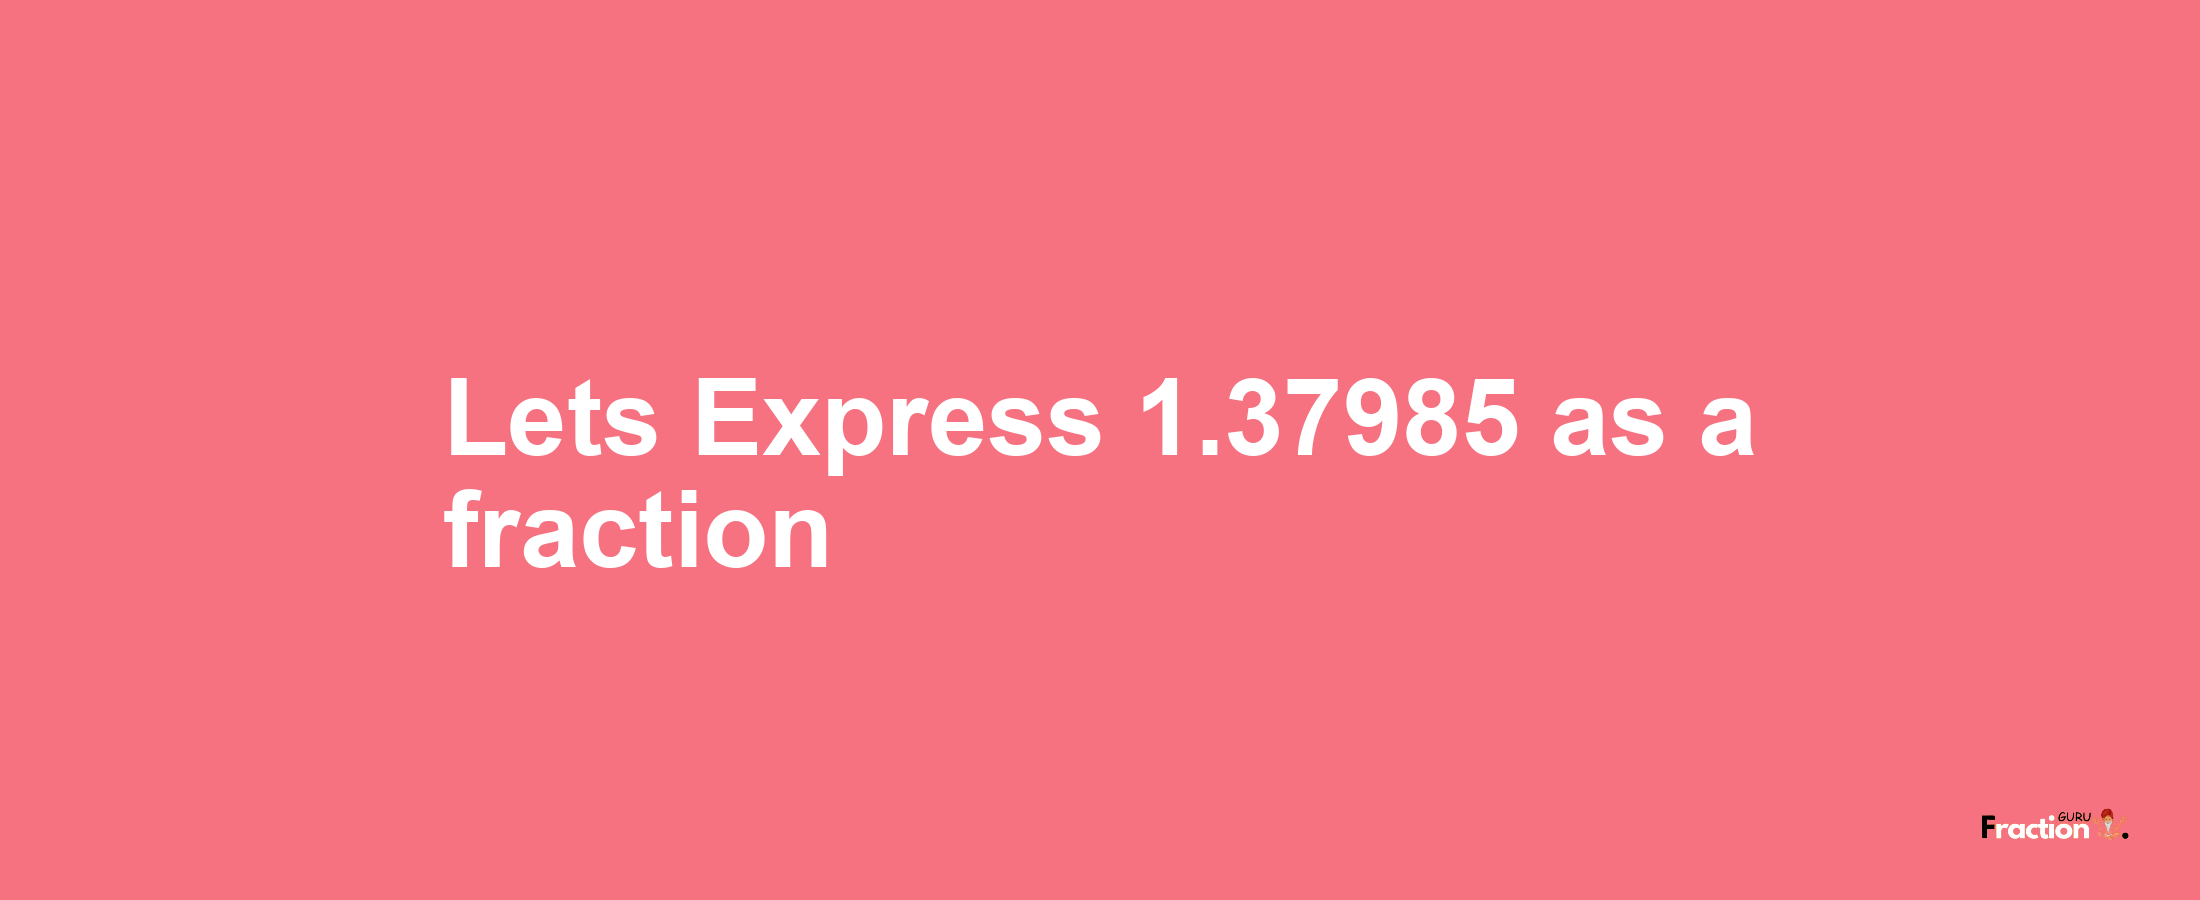 Lets Express 1.37985 as afraction